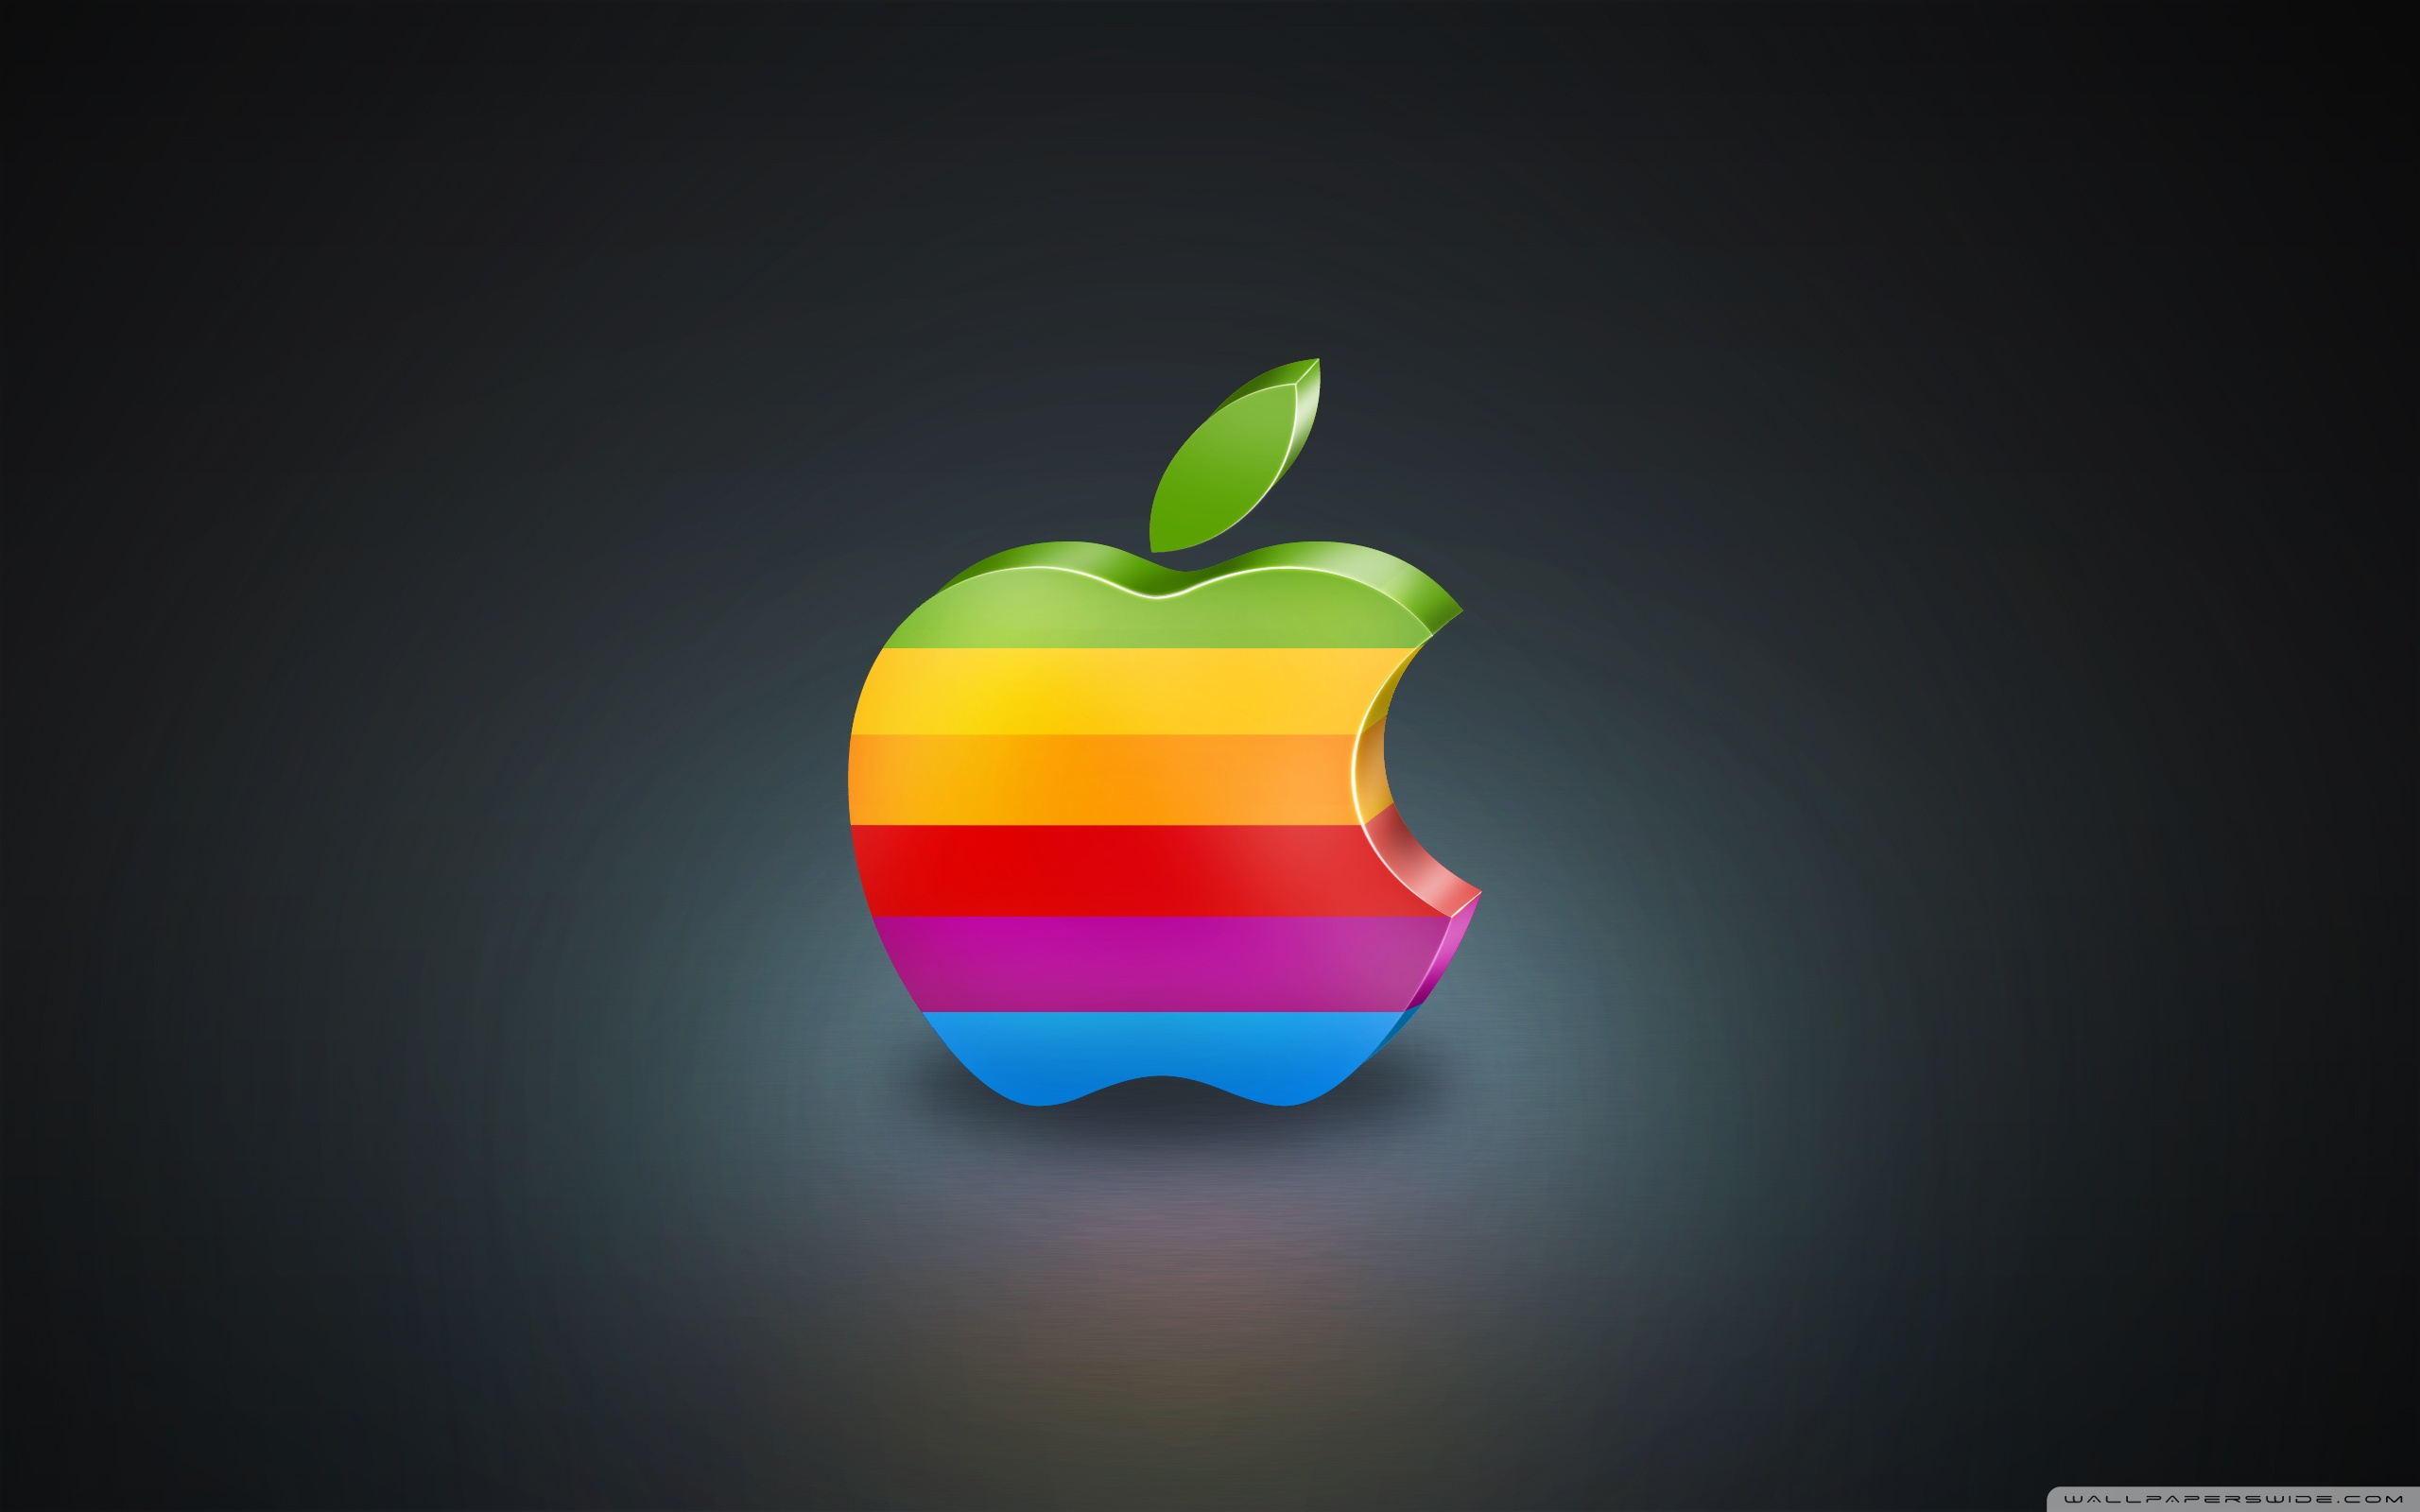 3d hd wallpapers,logo,fruit,operating system,colorfulness,graphic design